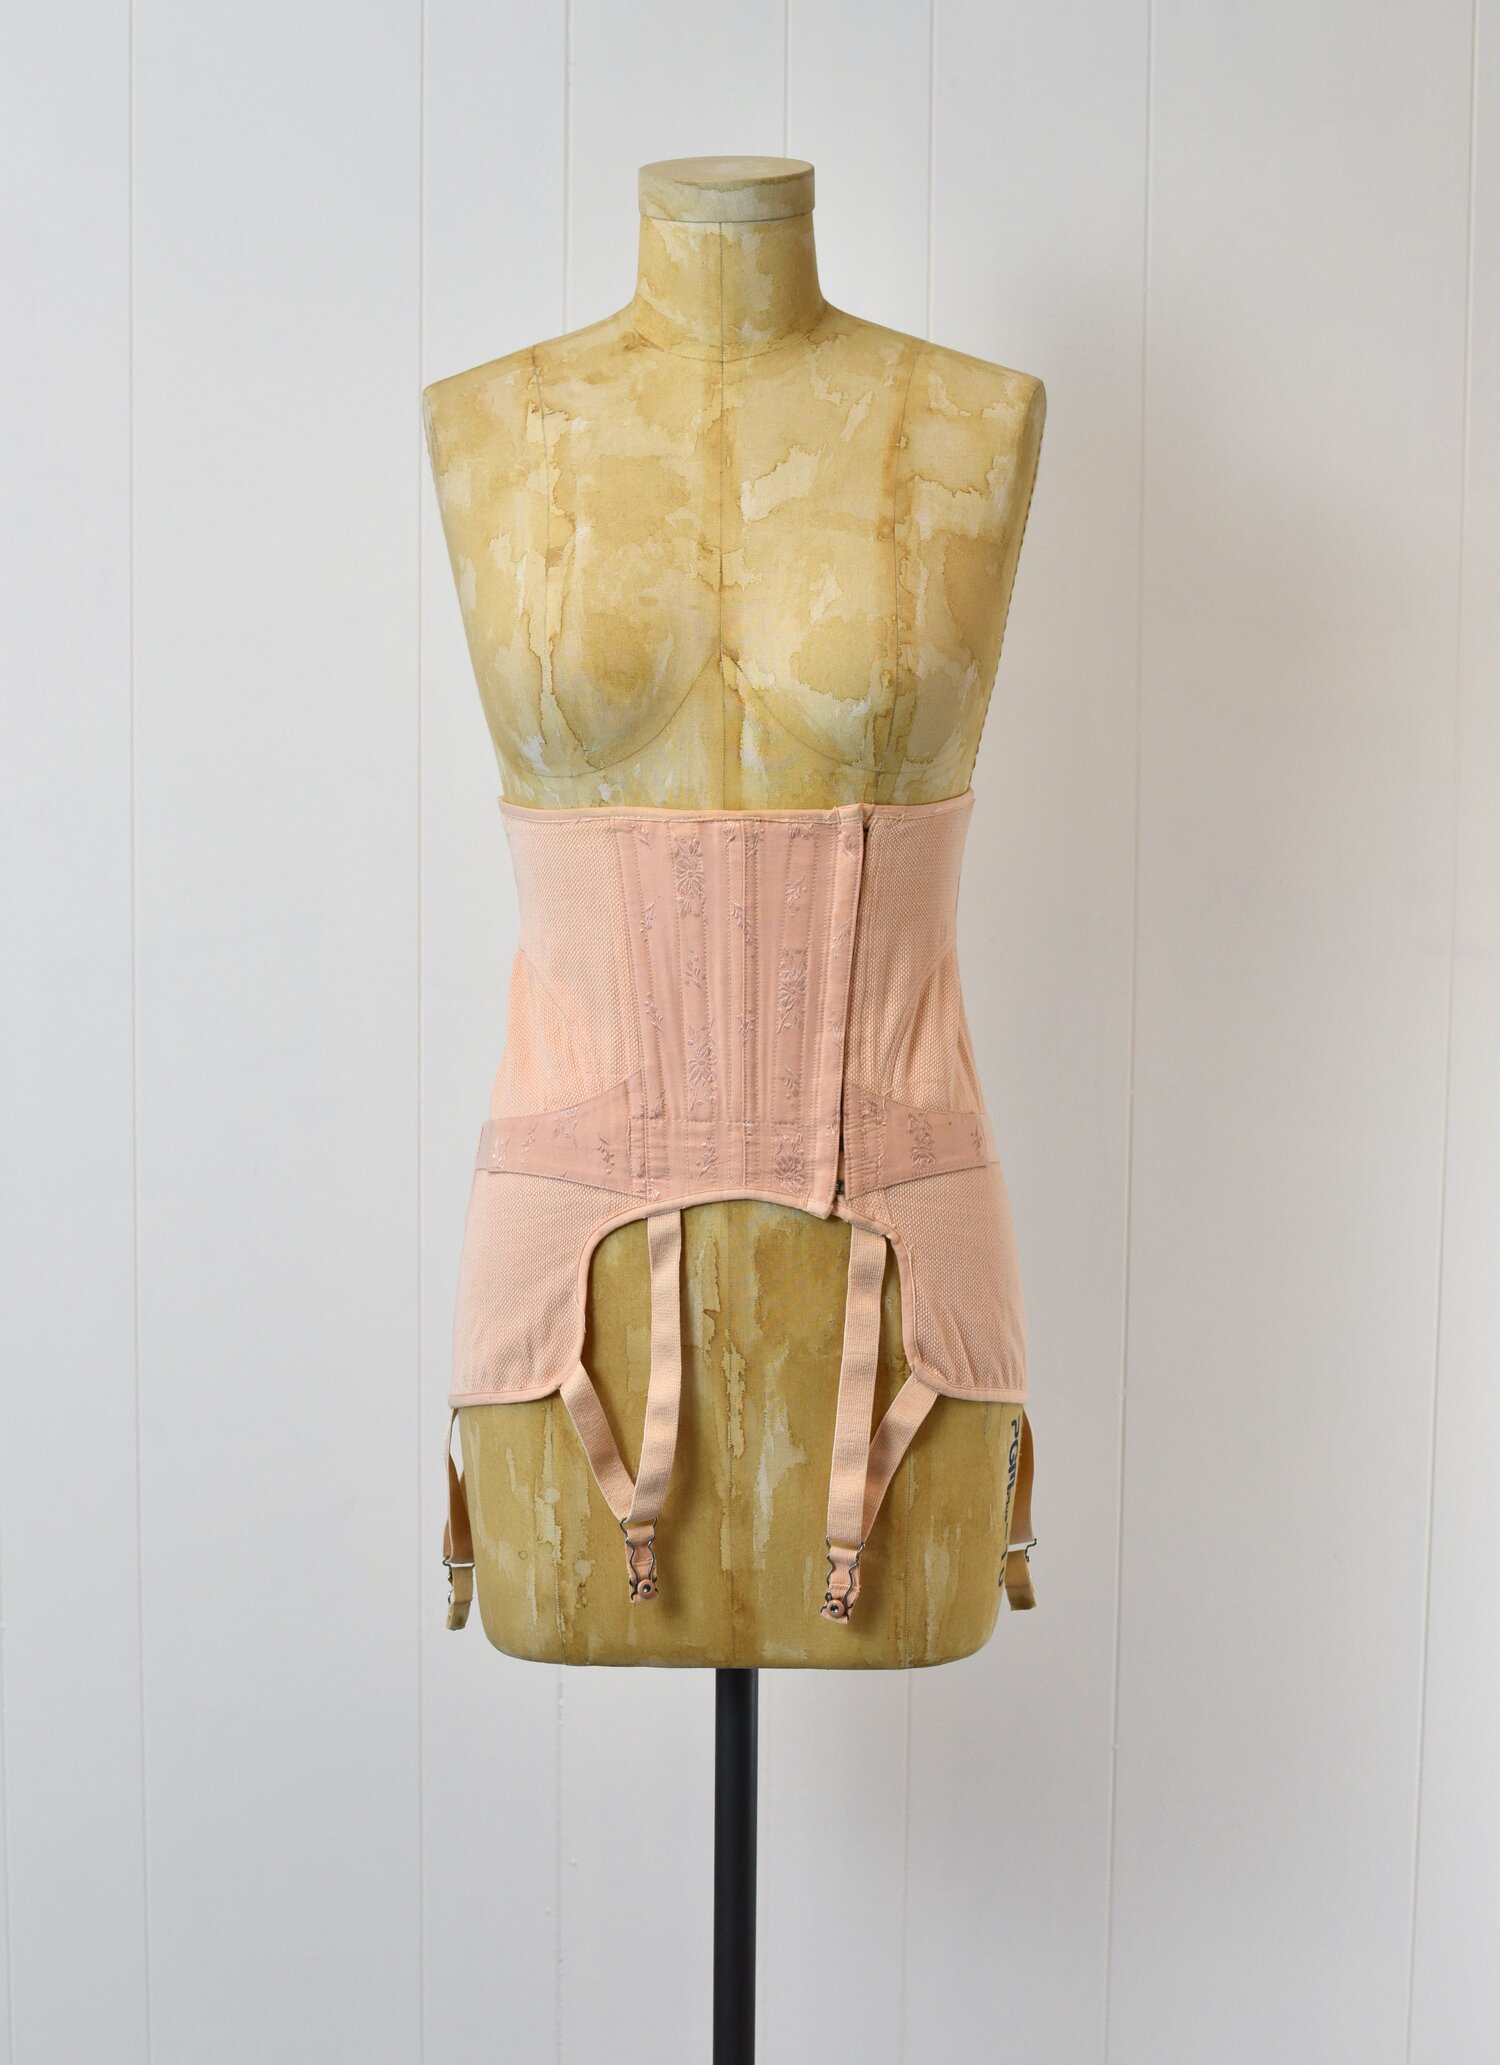 1940s 50s girdle corset, full body lace up boned pink grommet high